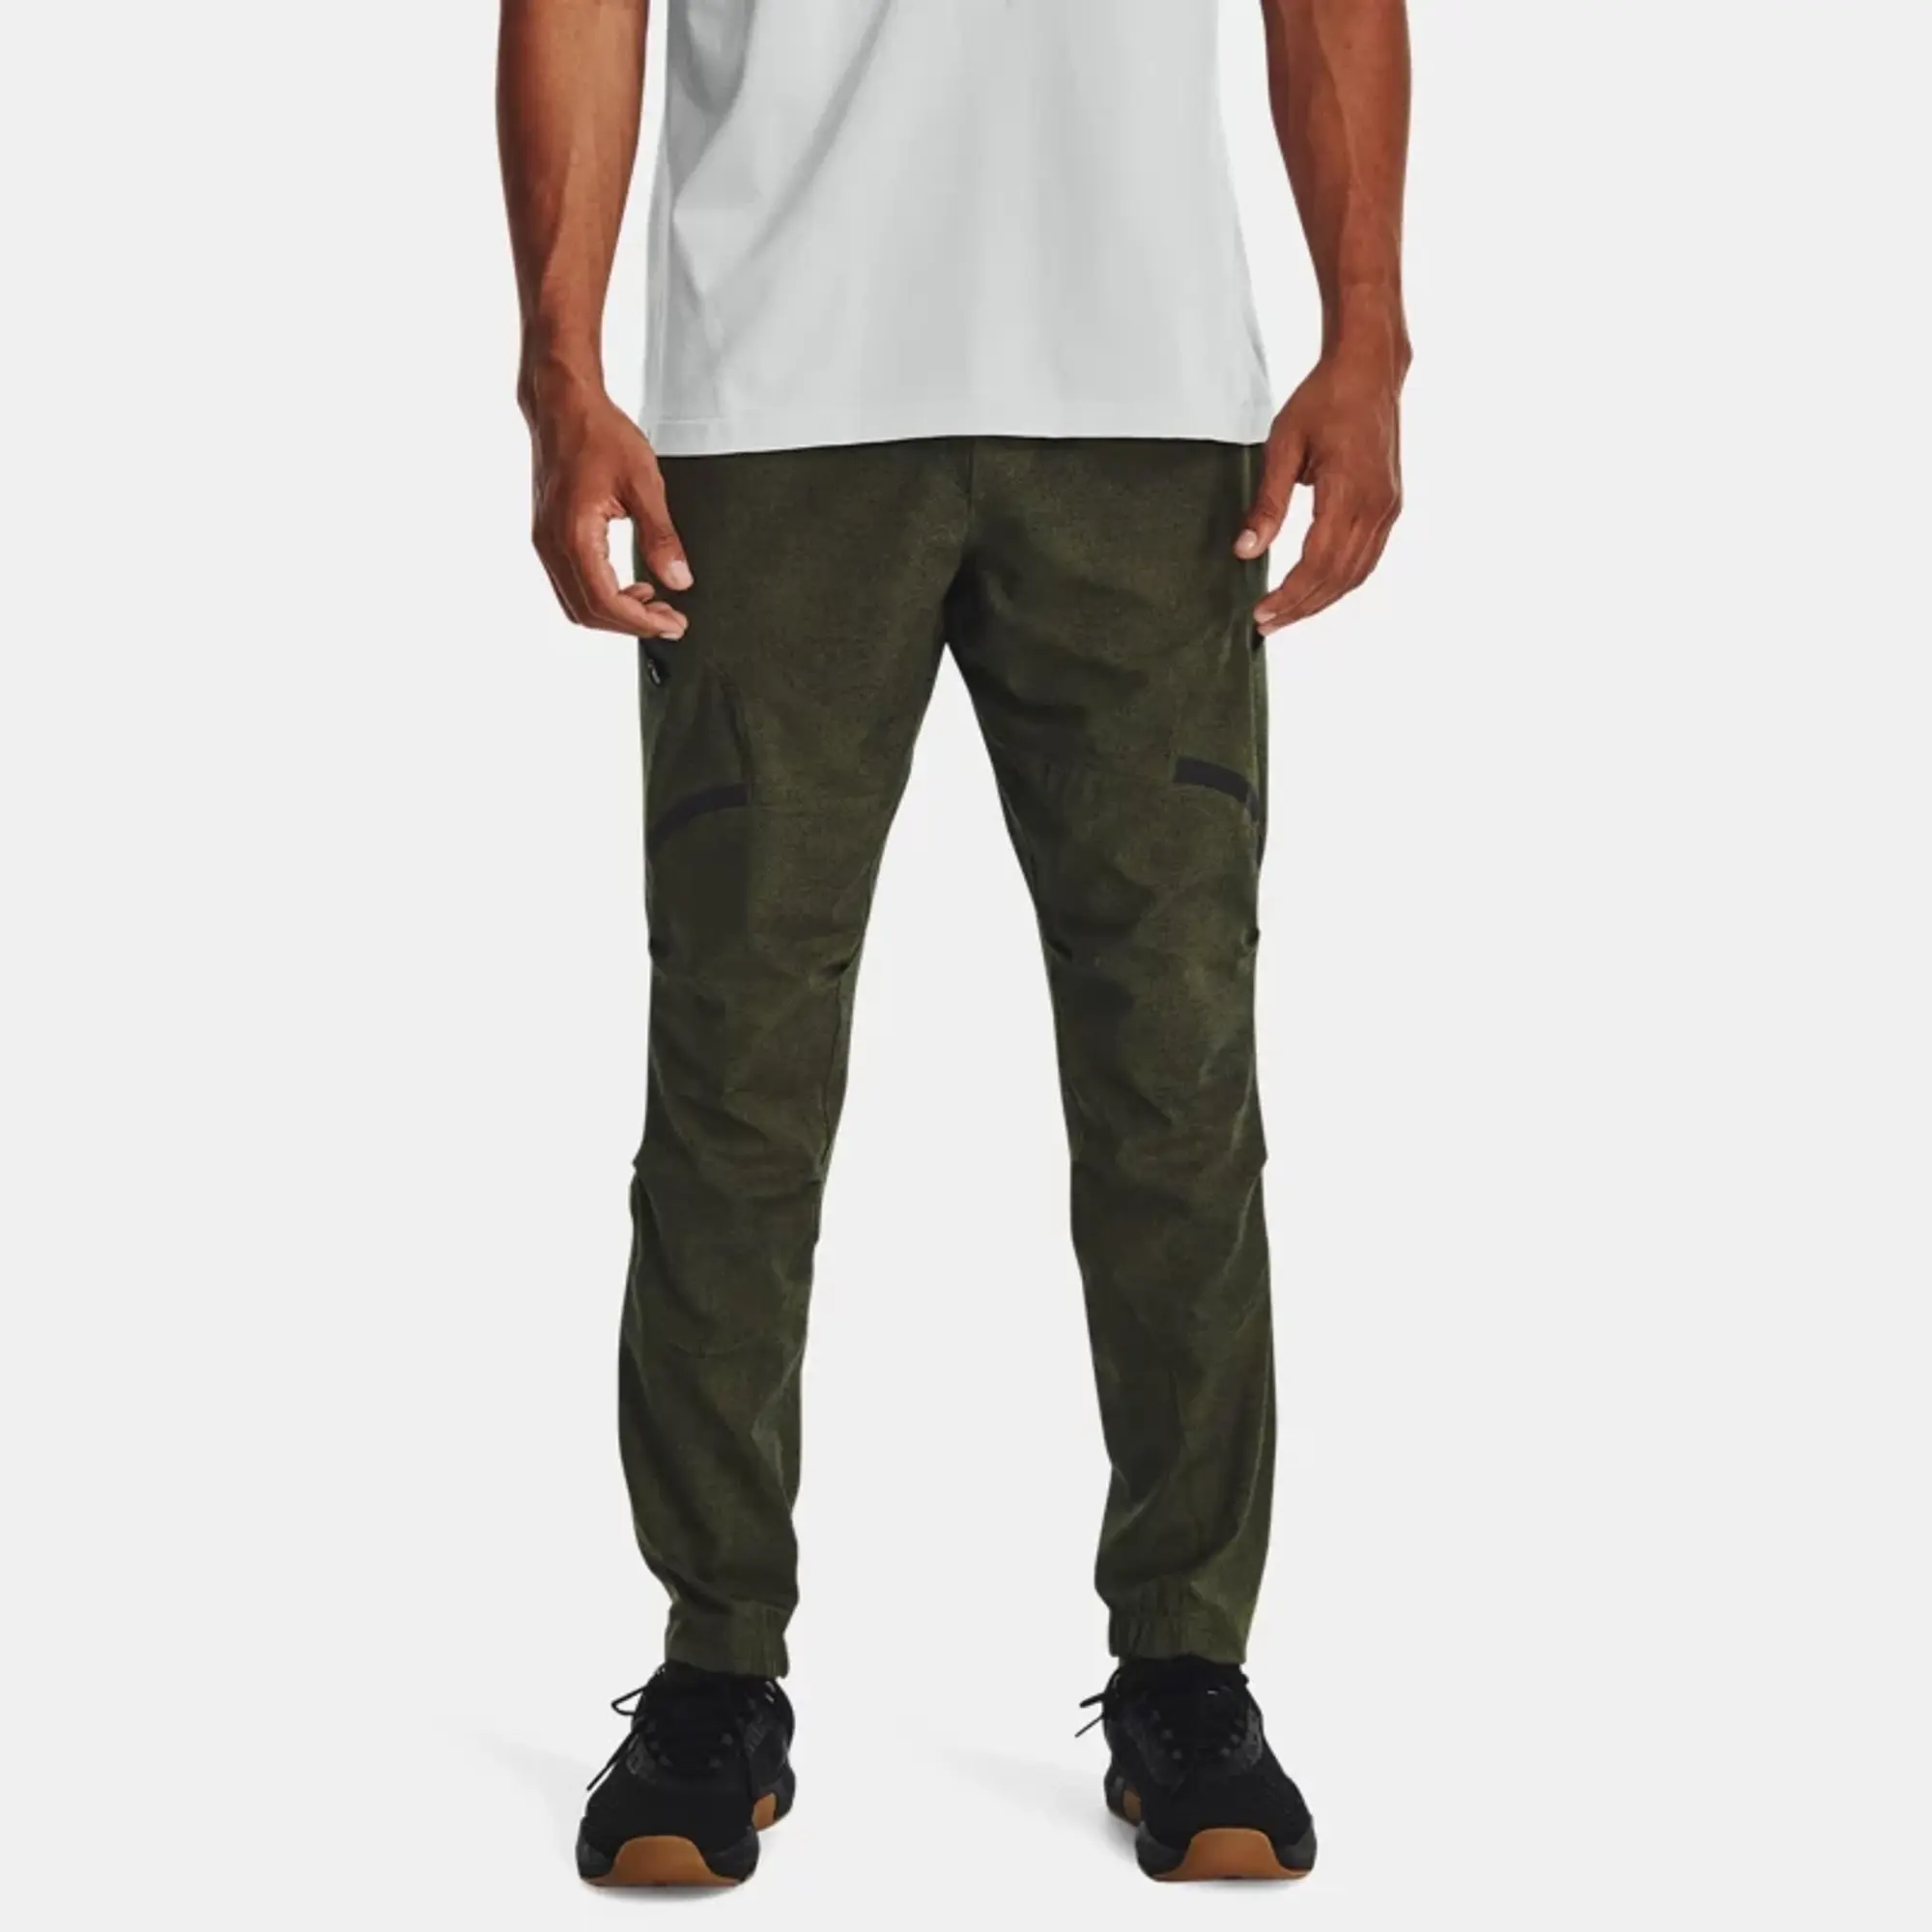 Men's Under Armour Unstoppable Cargo Pants Marine OD Green / Black ...